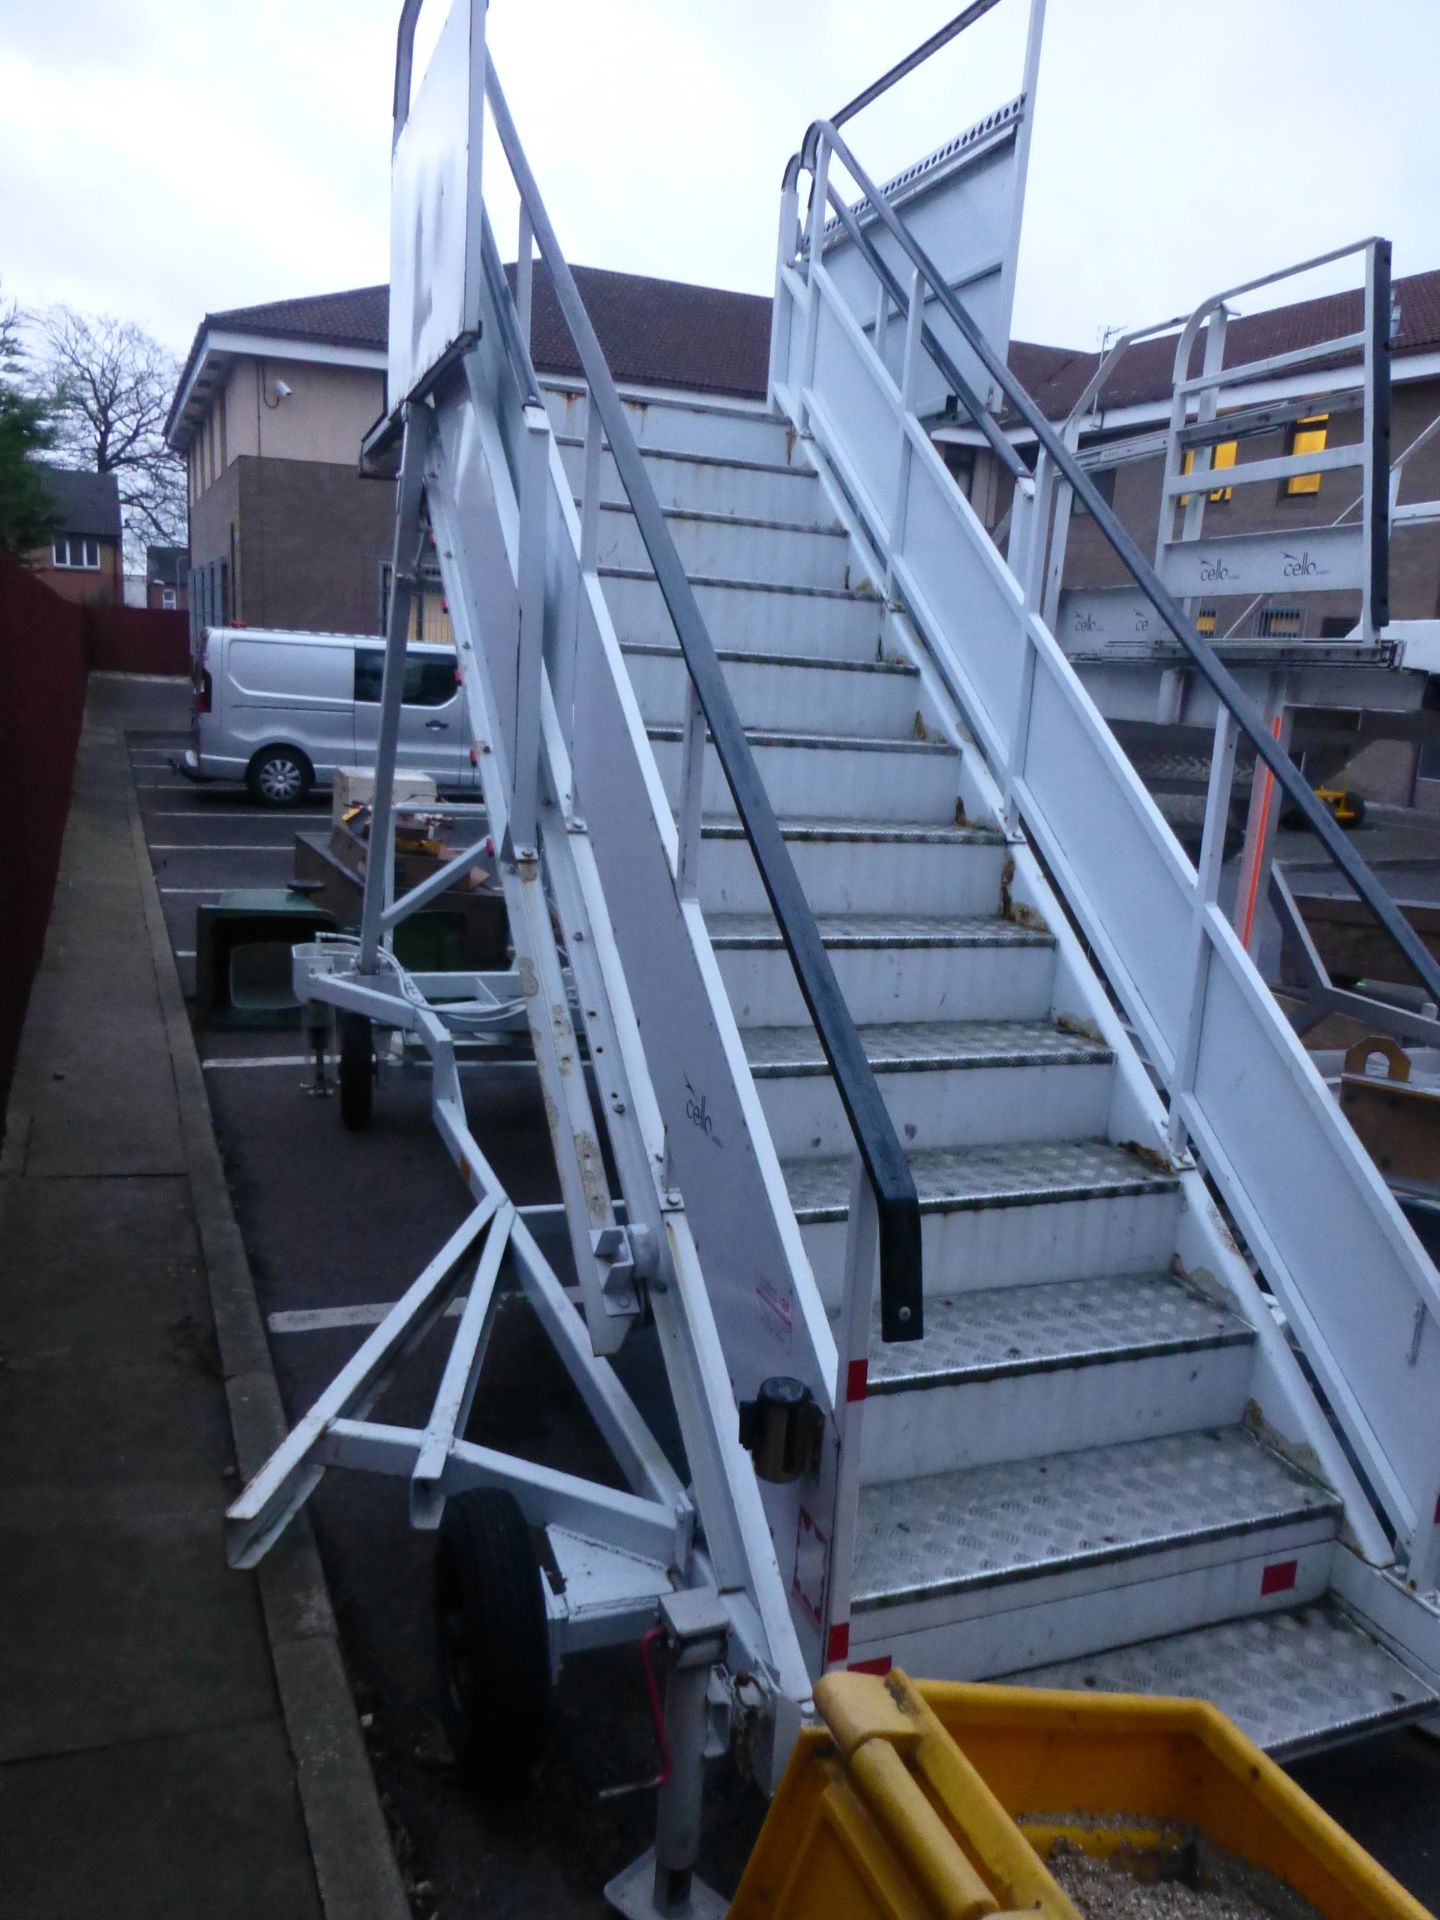 RH Philips LTTS 2636 Wide Body Towable Passenger Steps, Serial No: 34678, Plant No: Cello 22 ( - Image 2 of 2